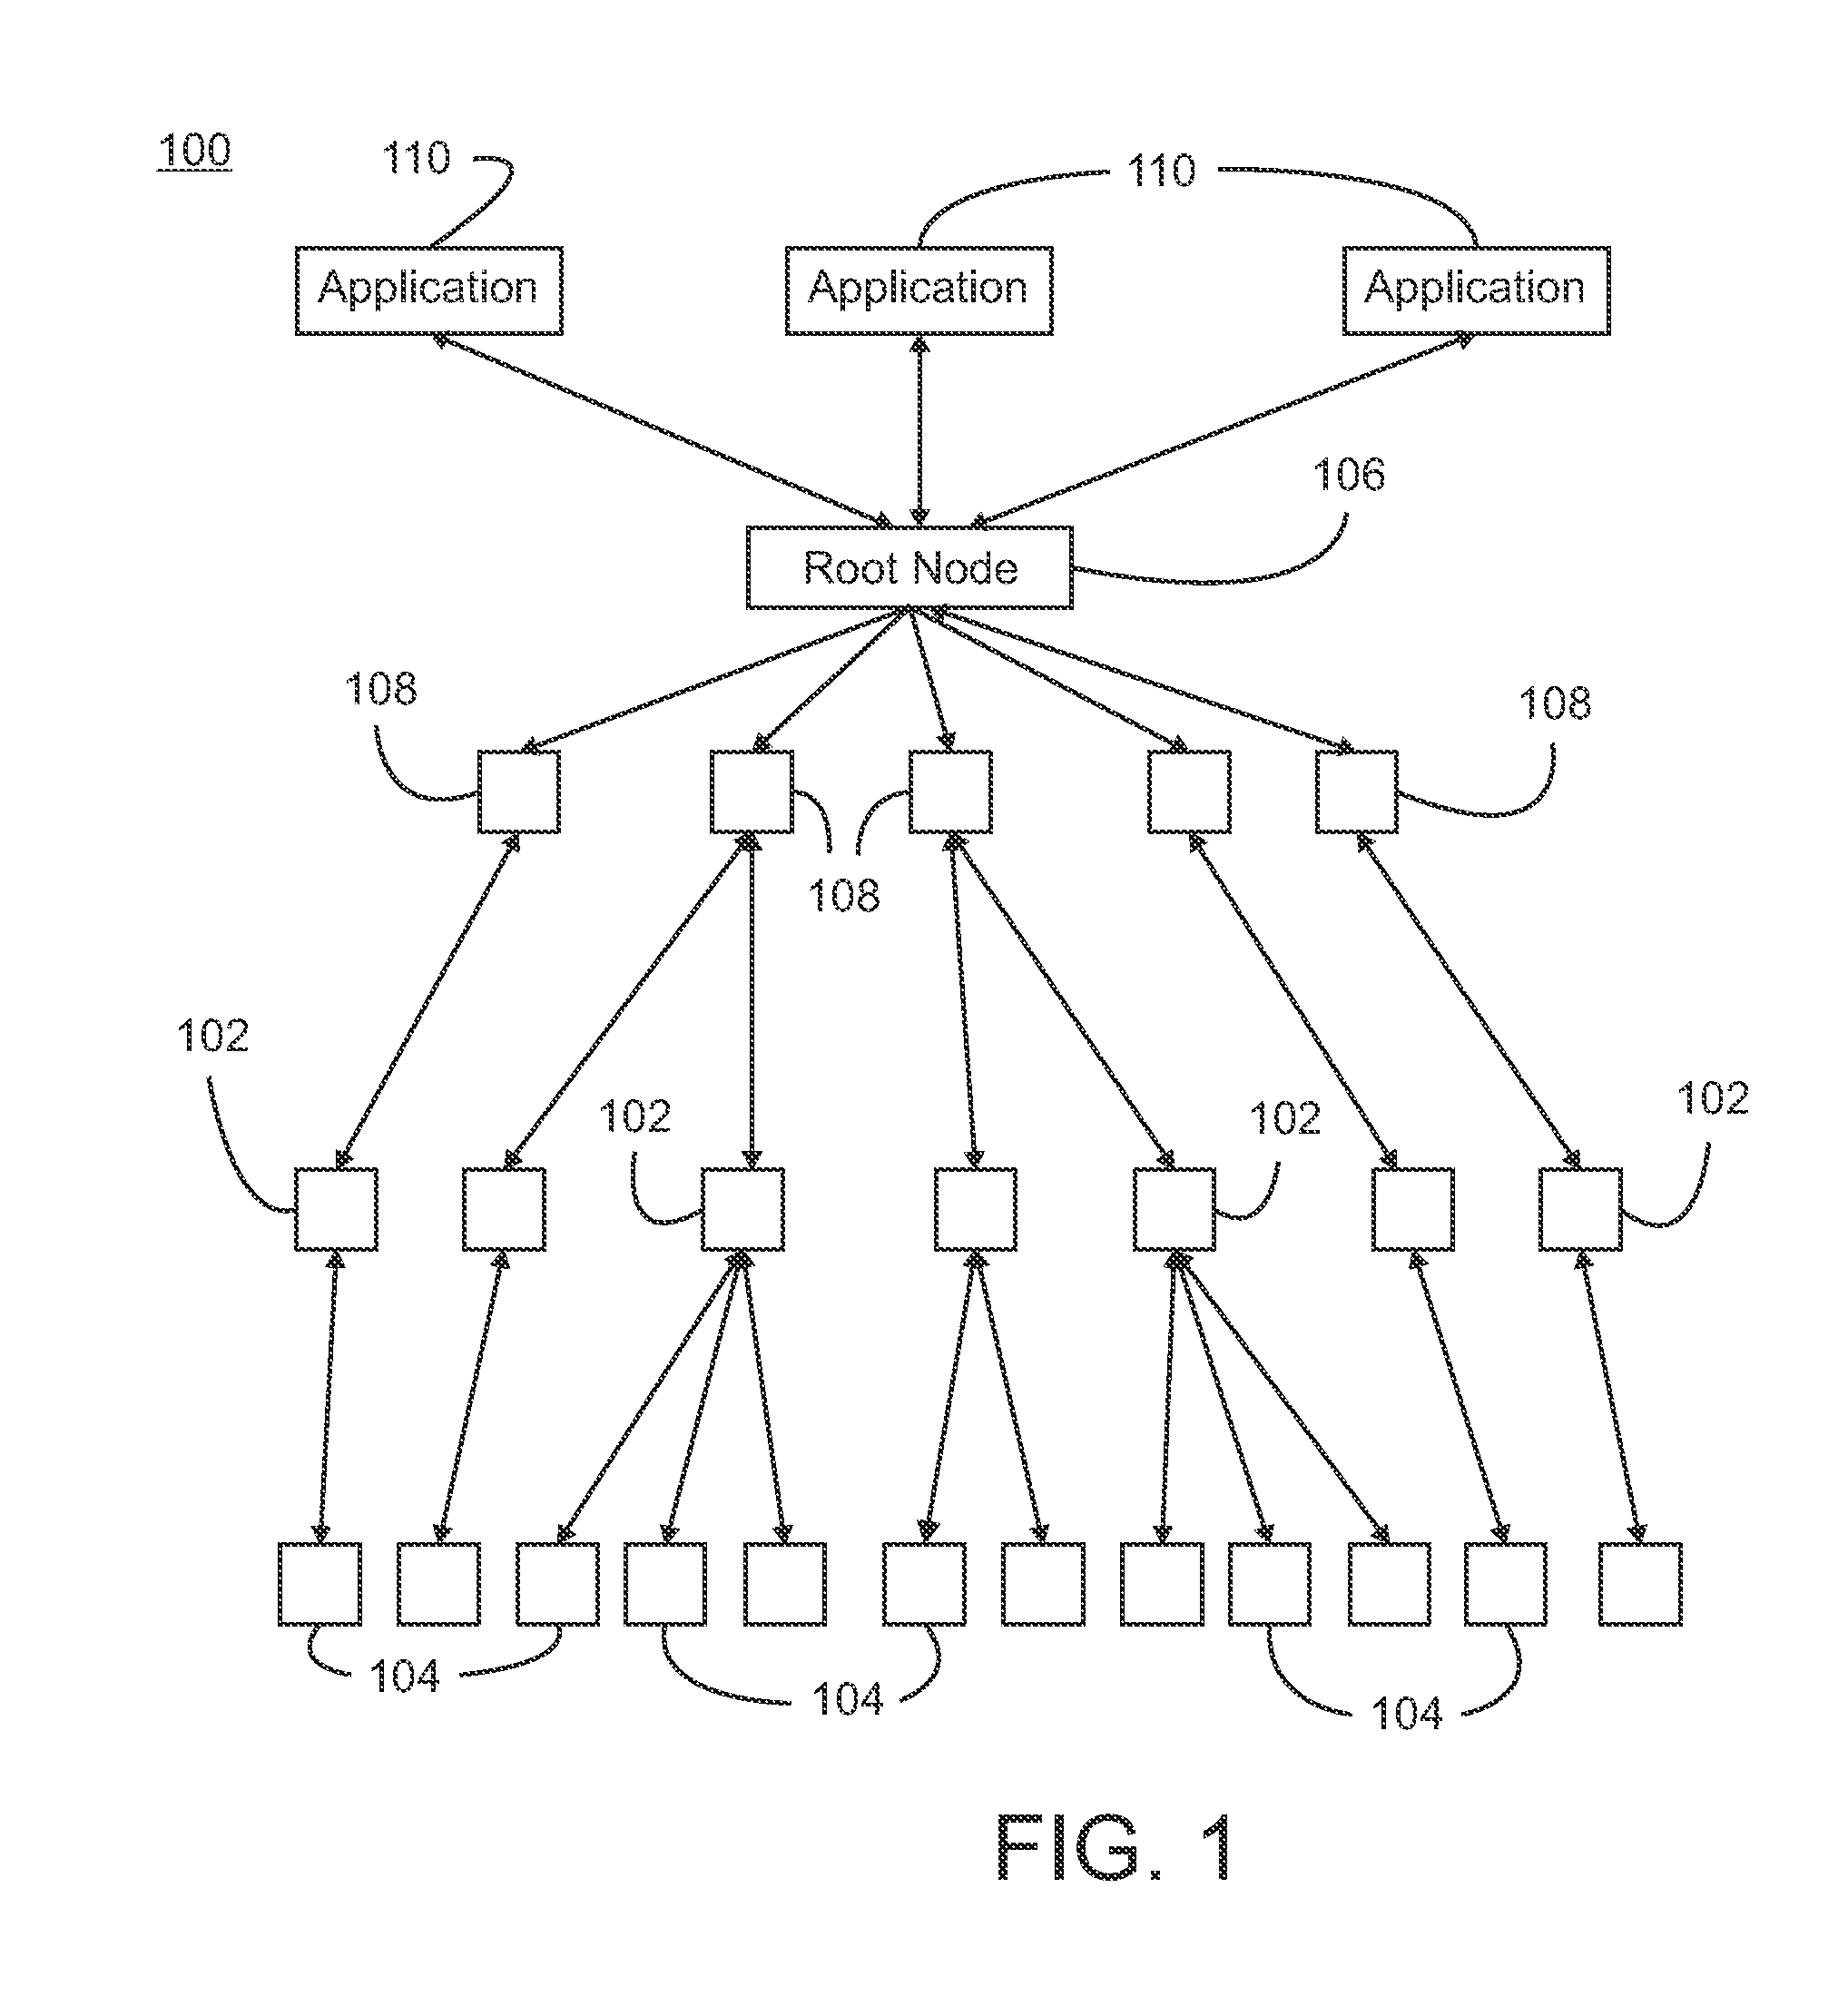 Multi-tier Indexing Methodology for Scalable Mobile Device Data Collection